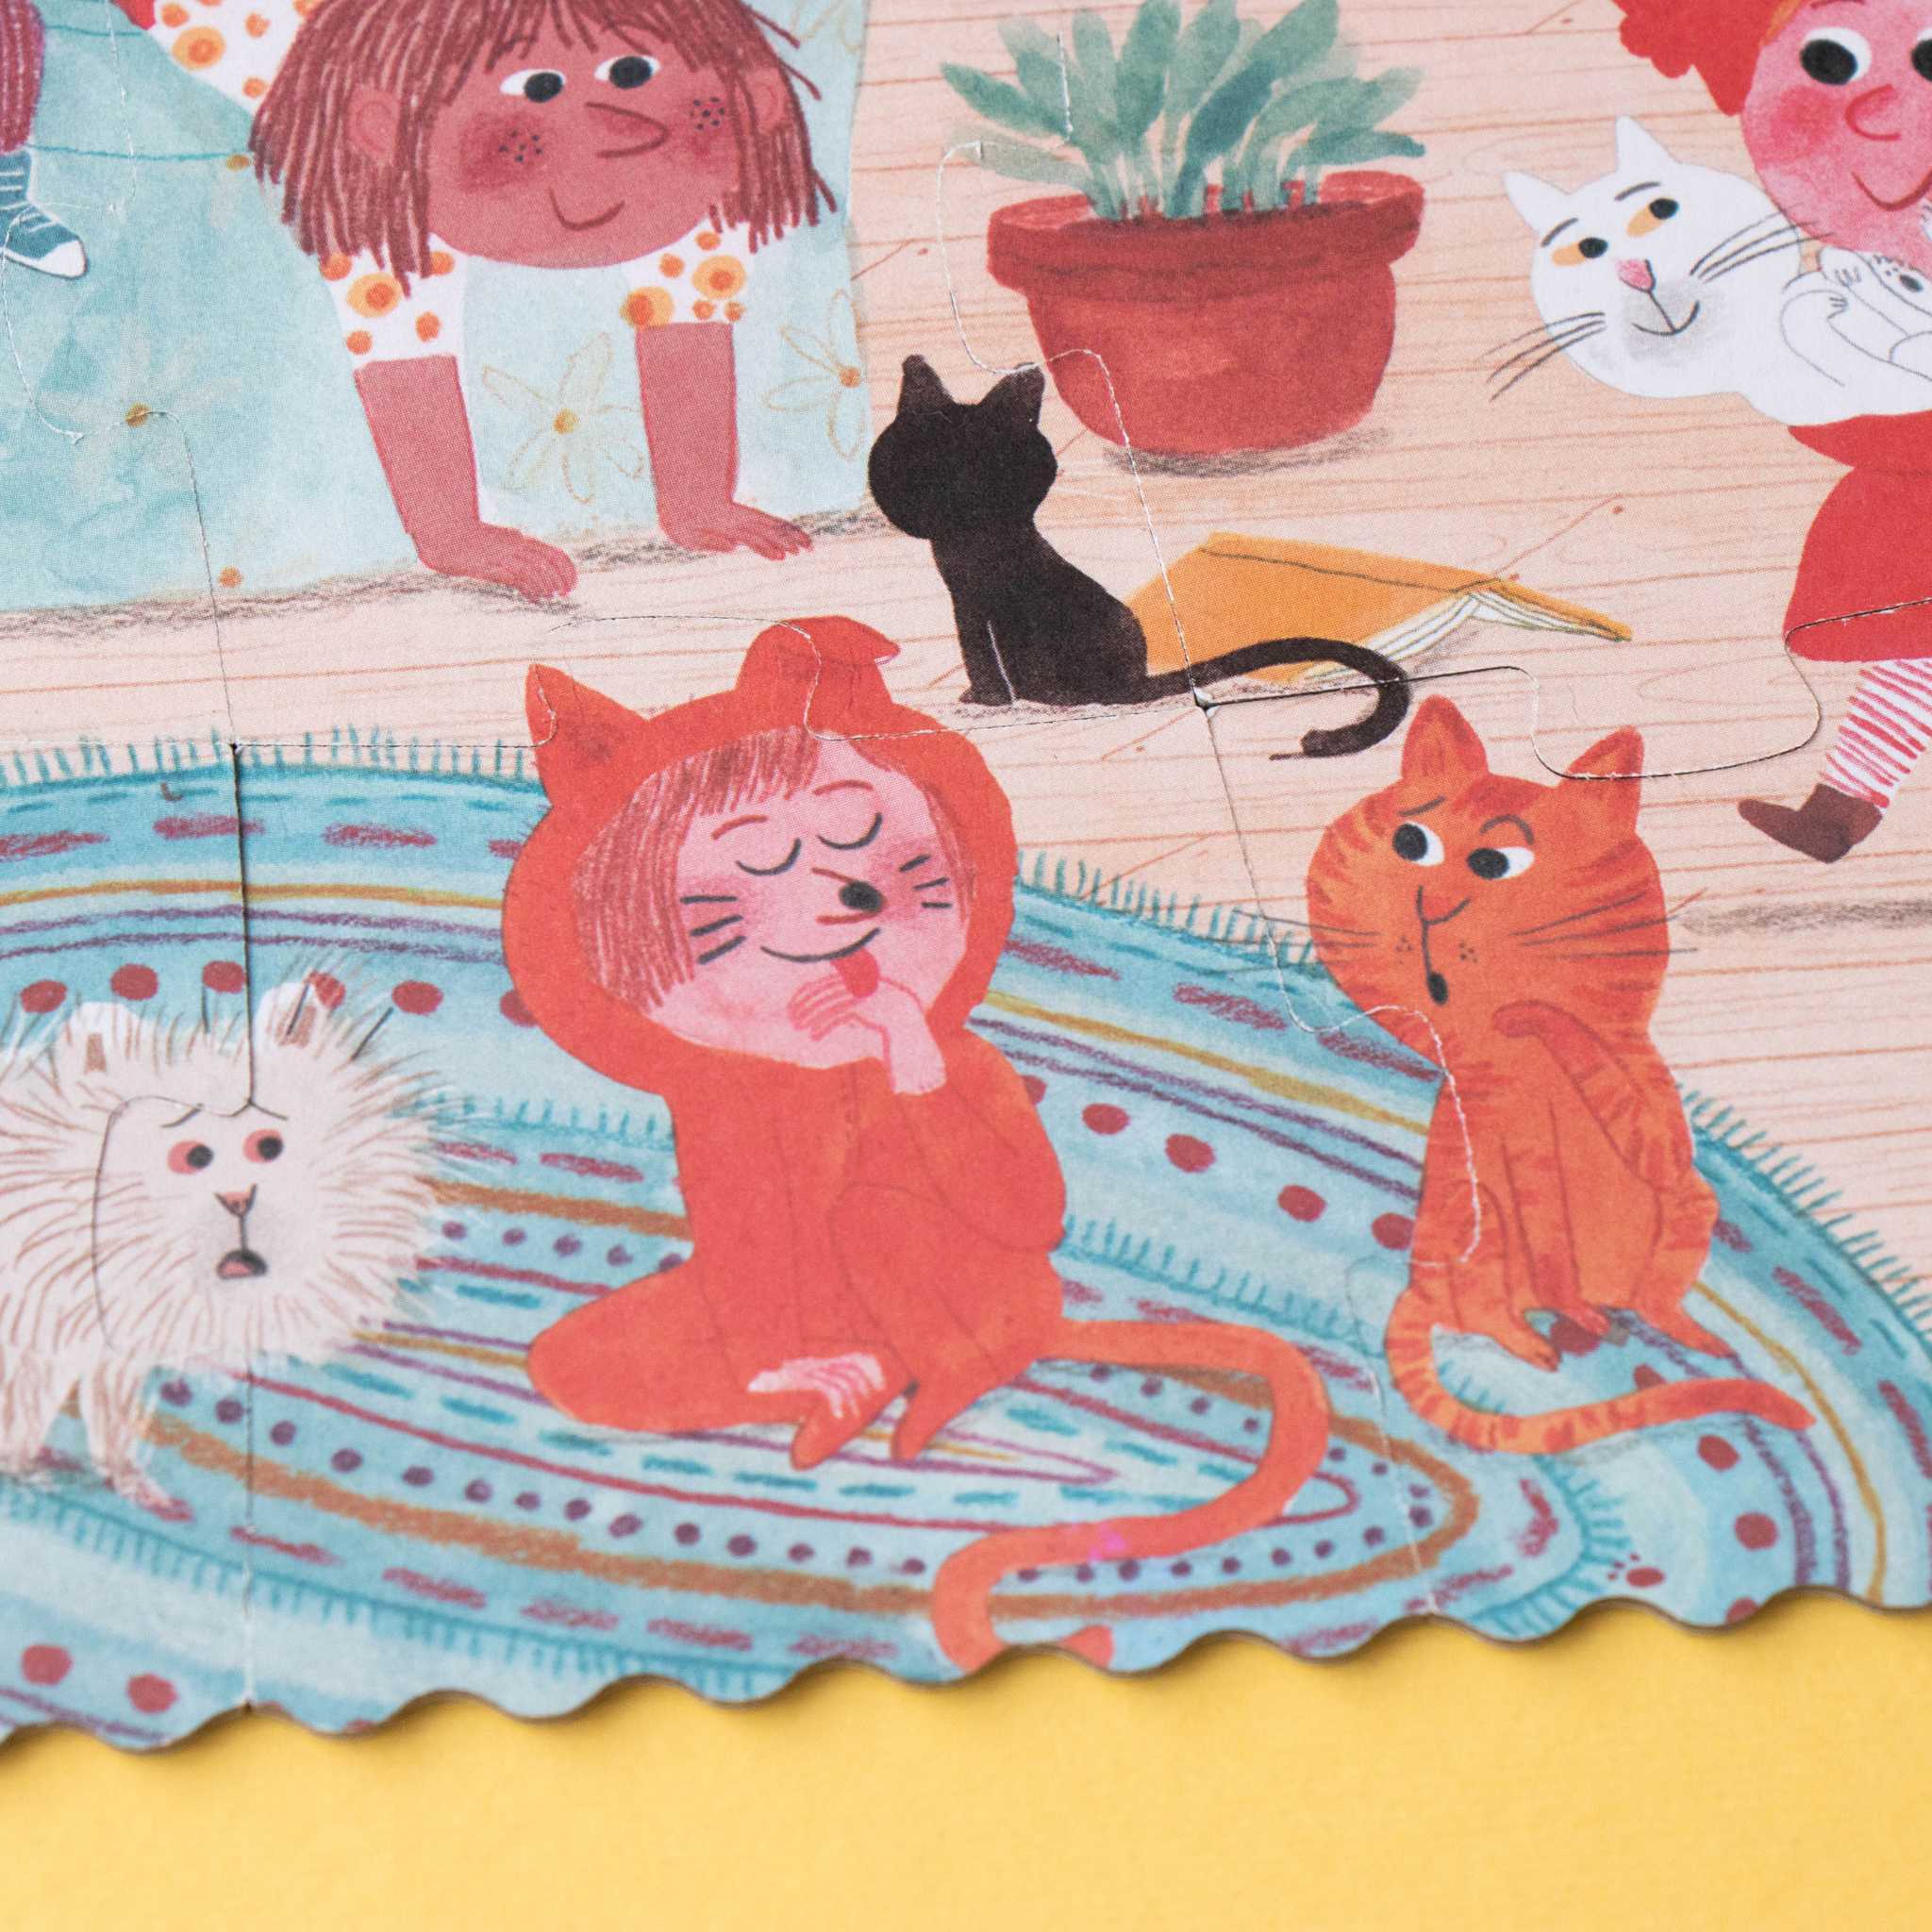 Londji Cats & Dogs Pocket Puzzle Age 3 Plus - Cats on Rug Pieces